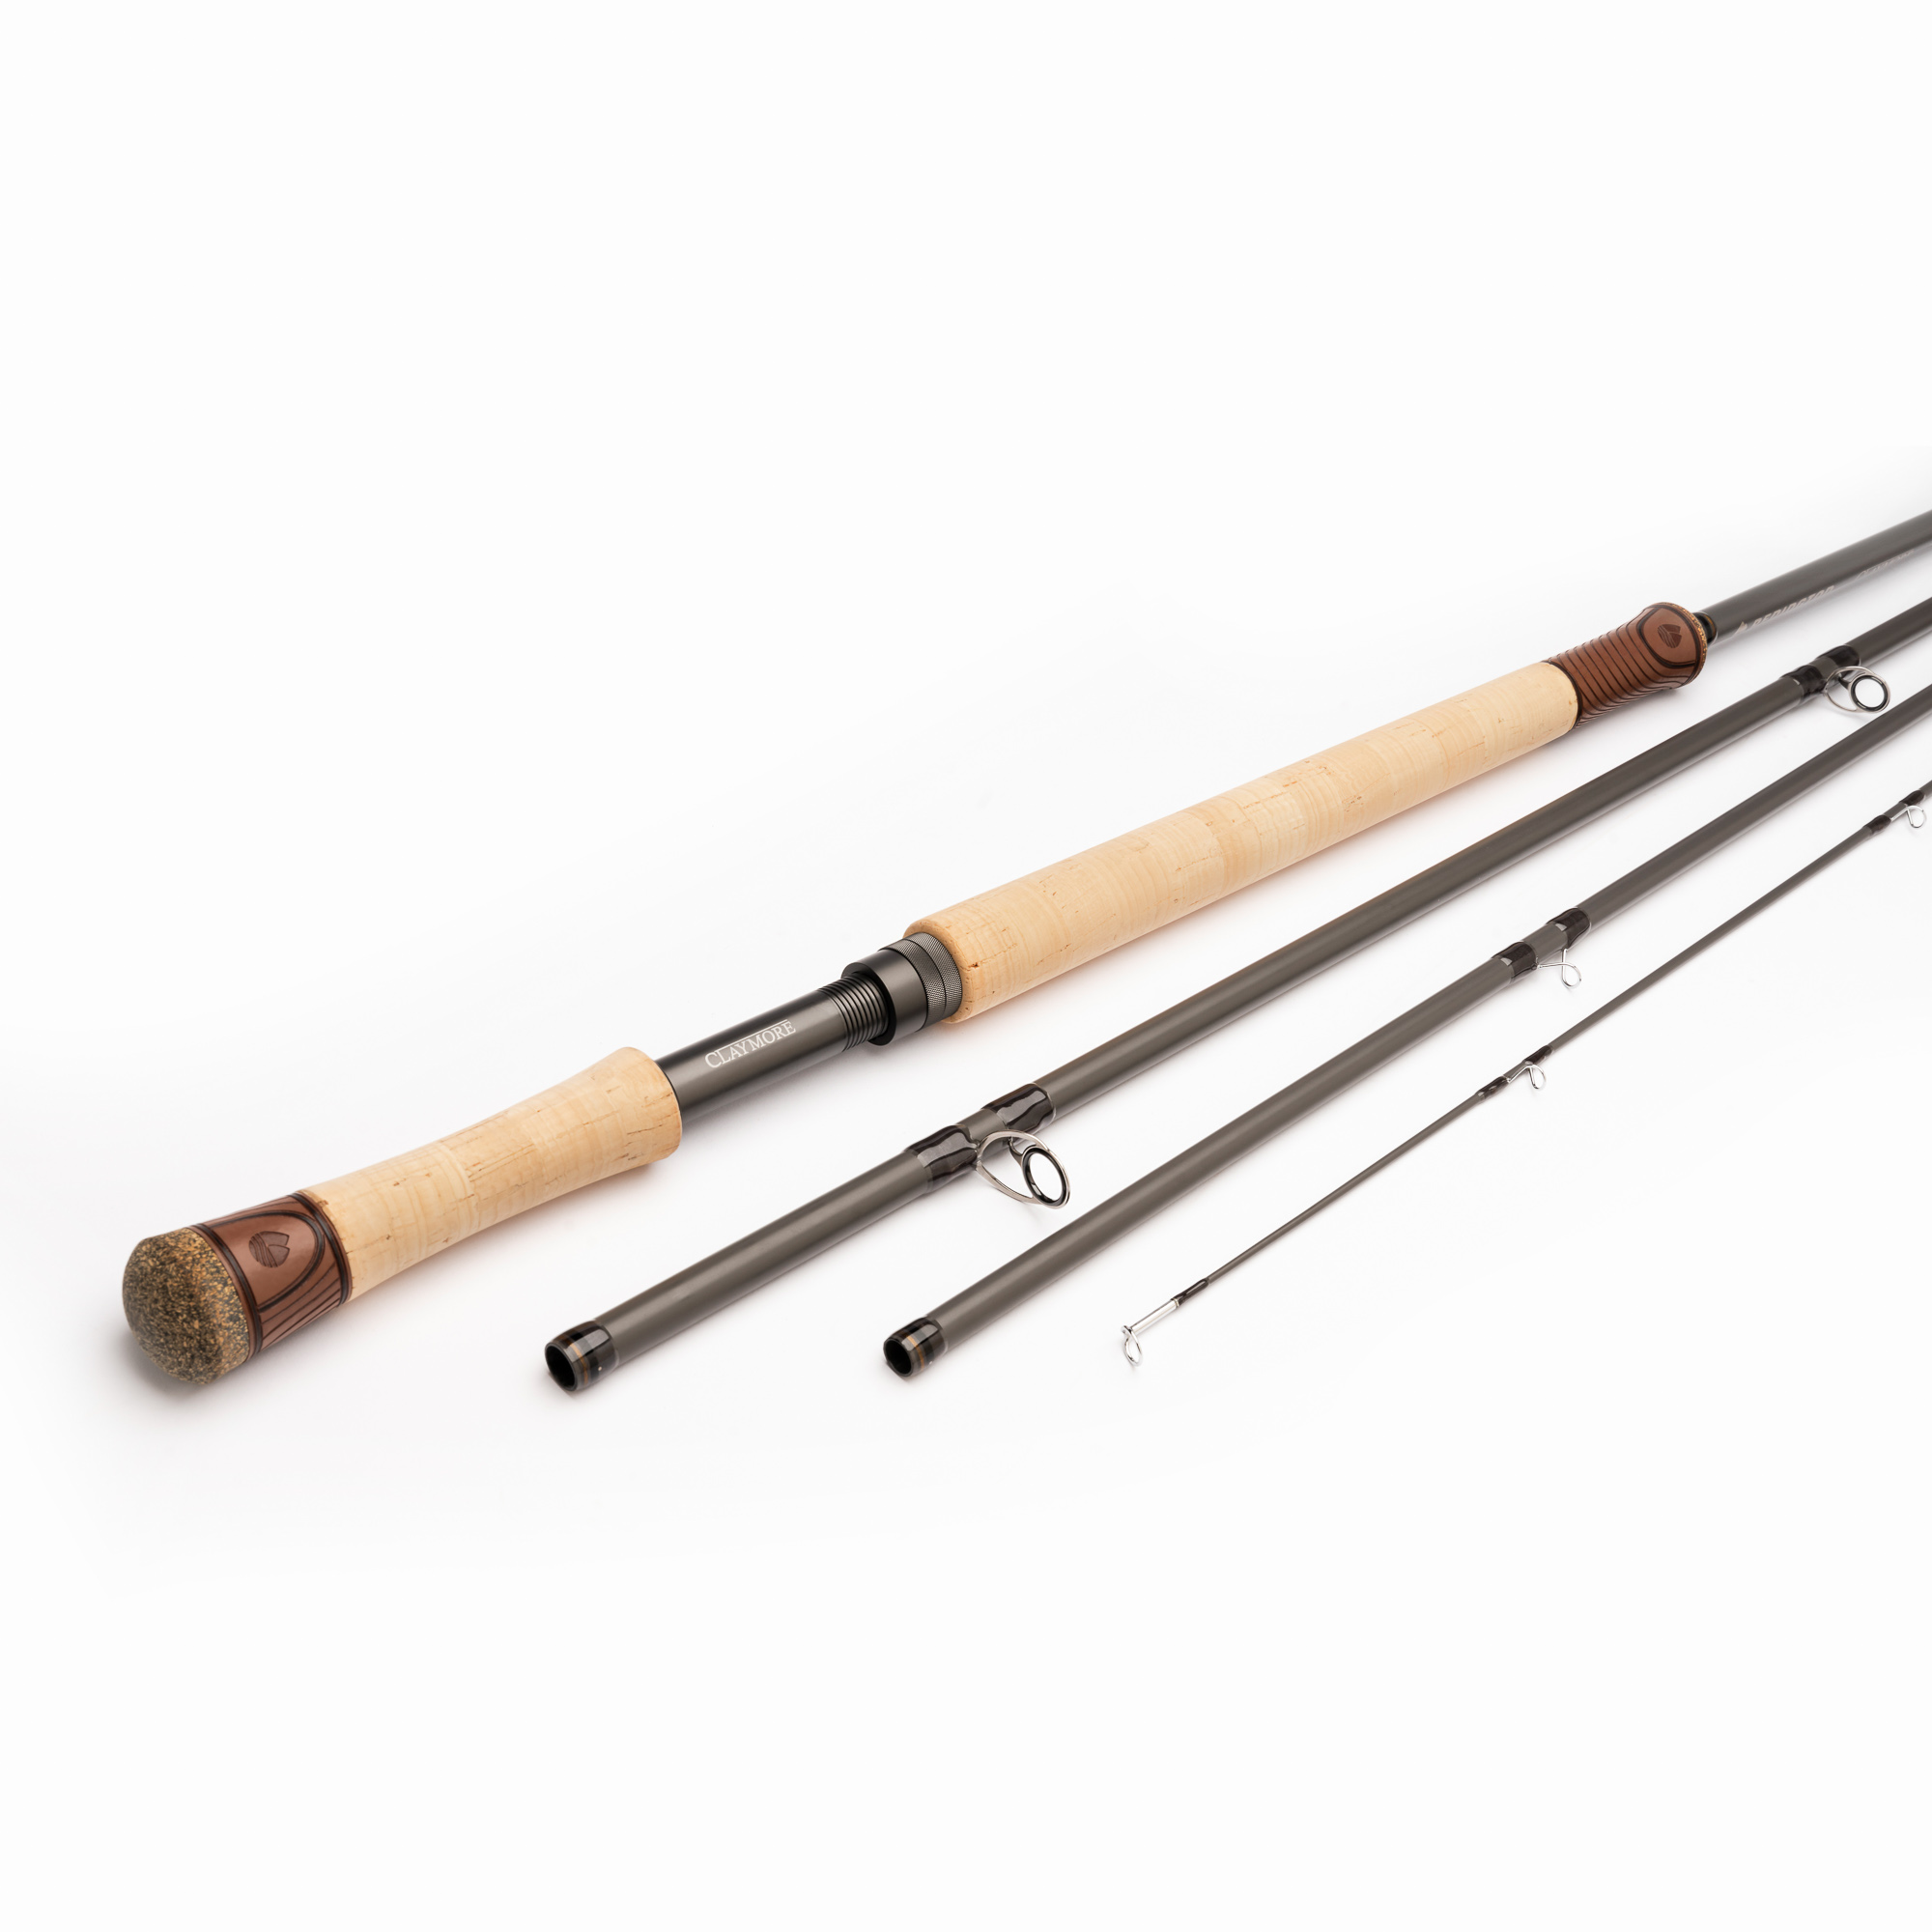 Redington Claymore Switch Fly Rod – Guide Flyfishing, Fly Fishing Rods,  Reels, Sage, Redington, RIO